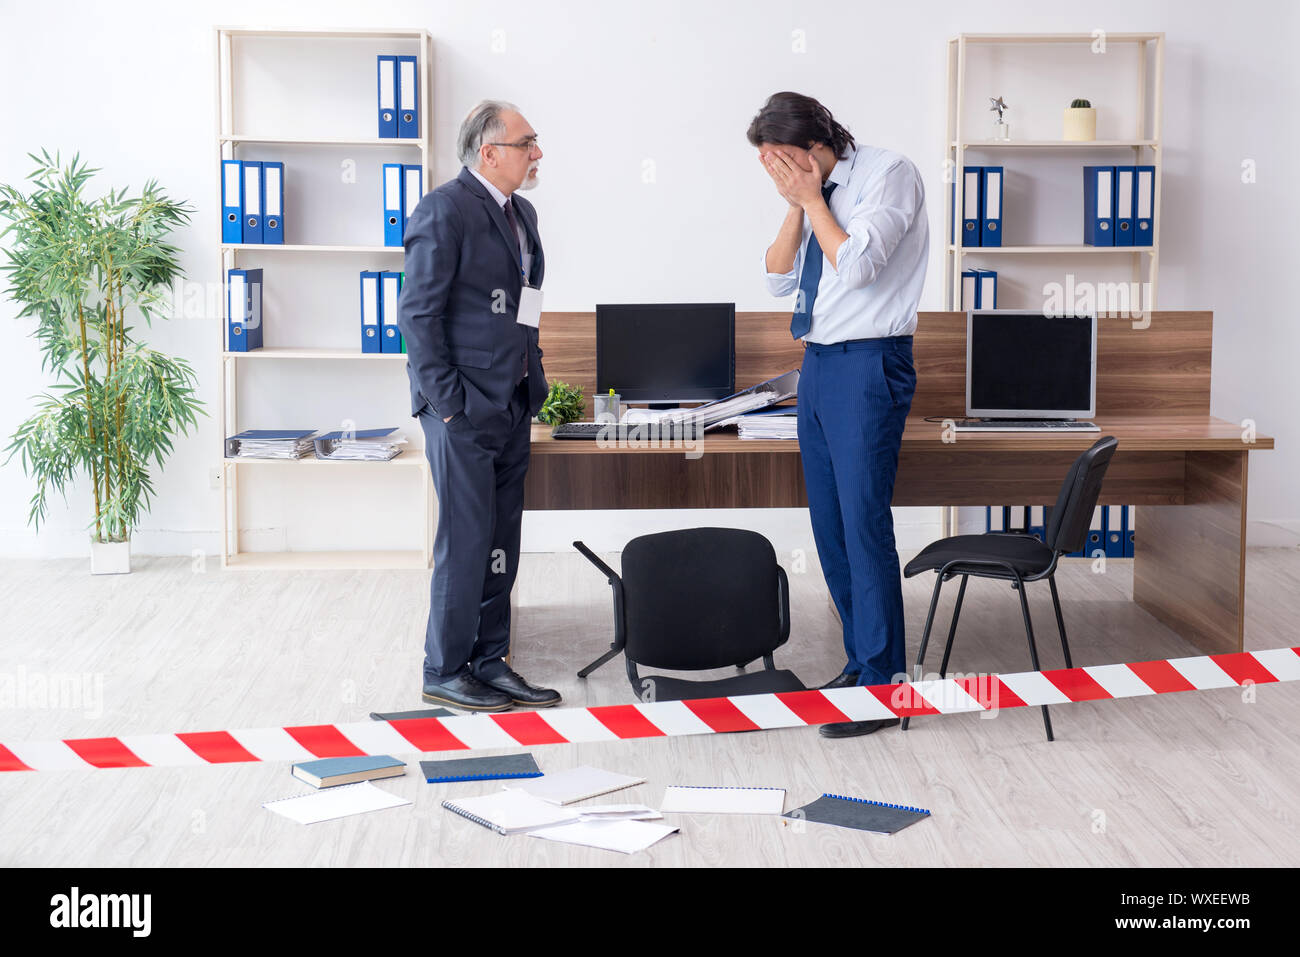 Forensic investigator investigating theft in the office Stock Photo